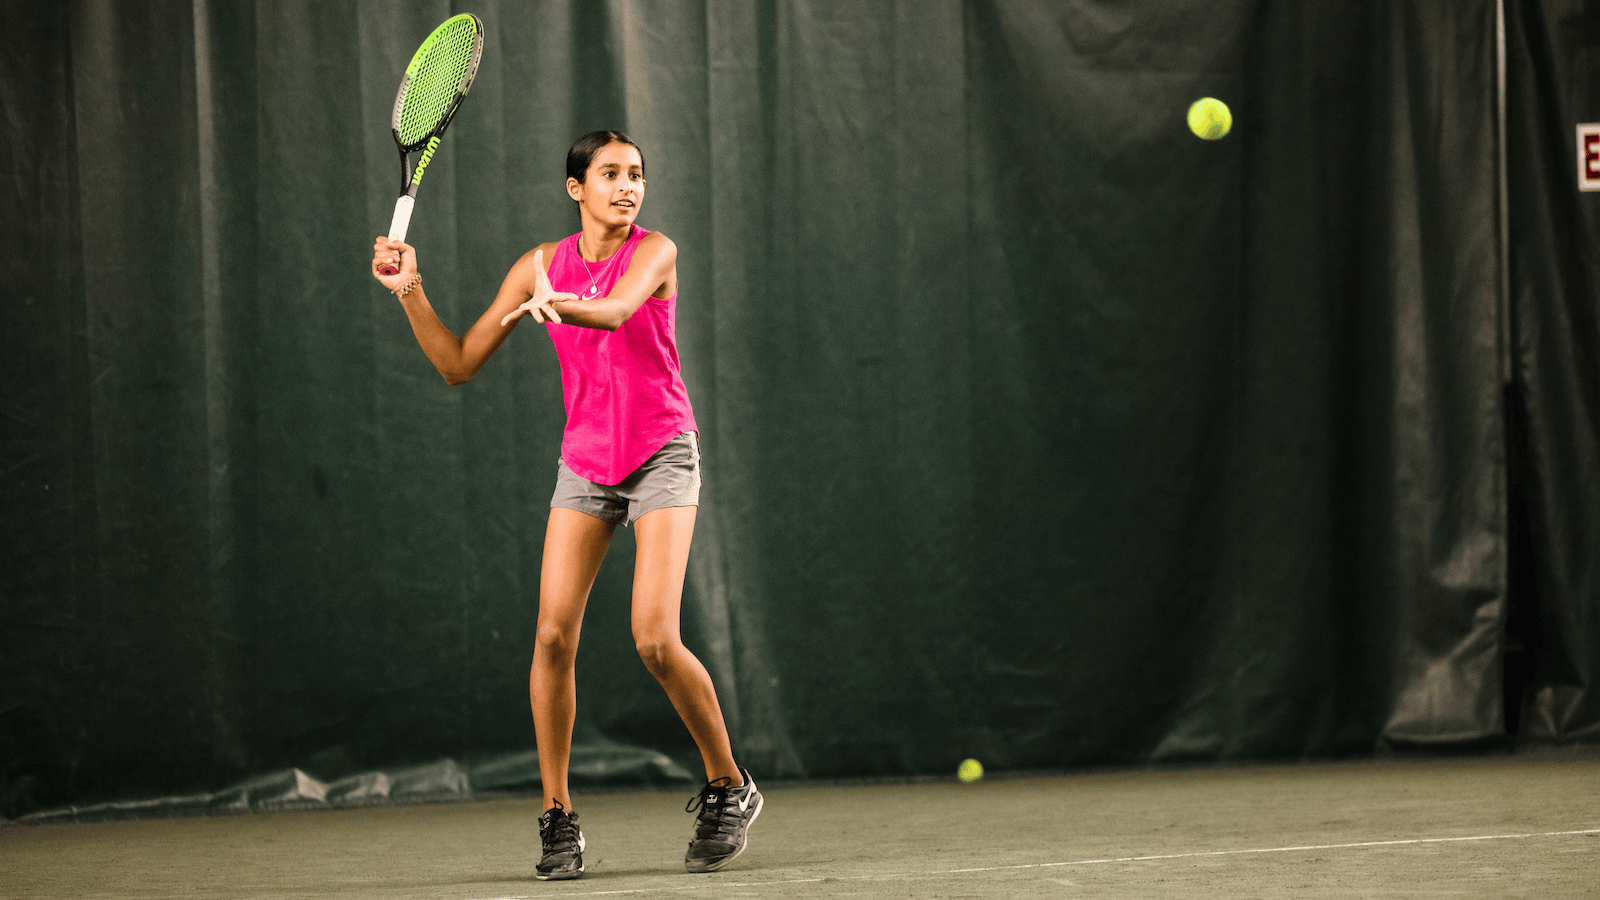 A young girl hits a forehand at SPORTIME in New York.